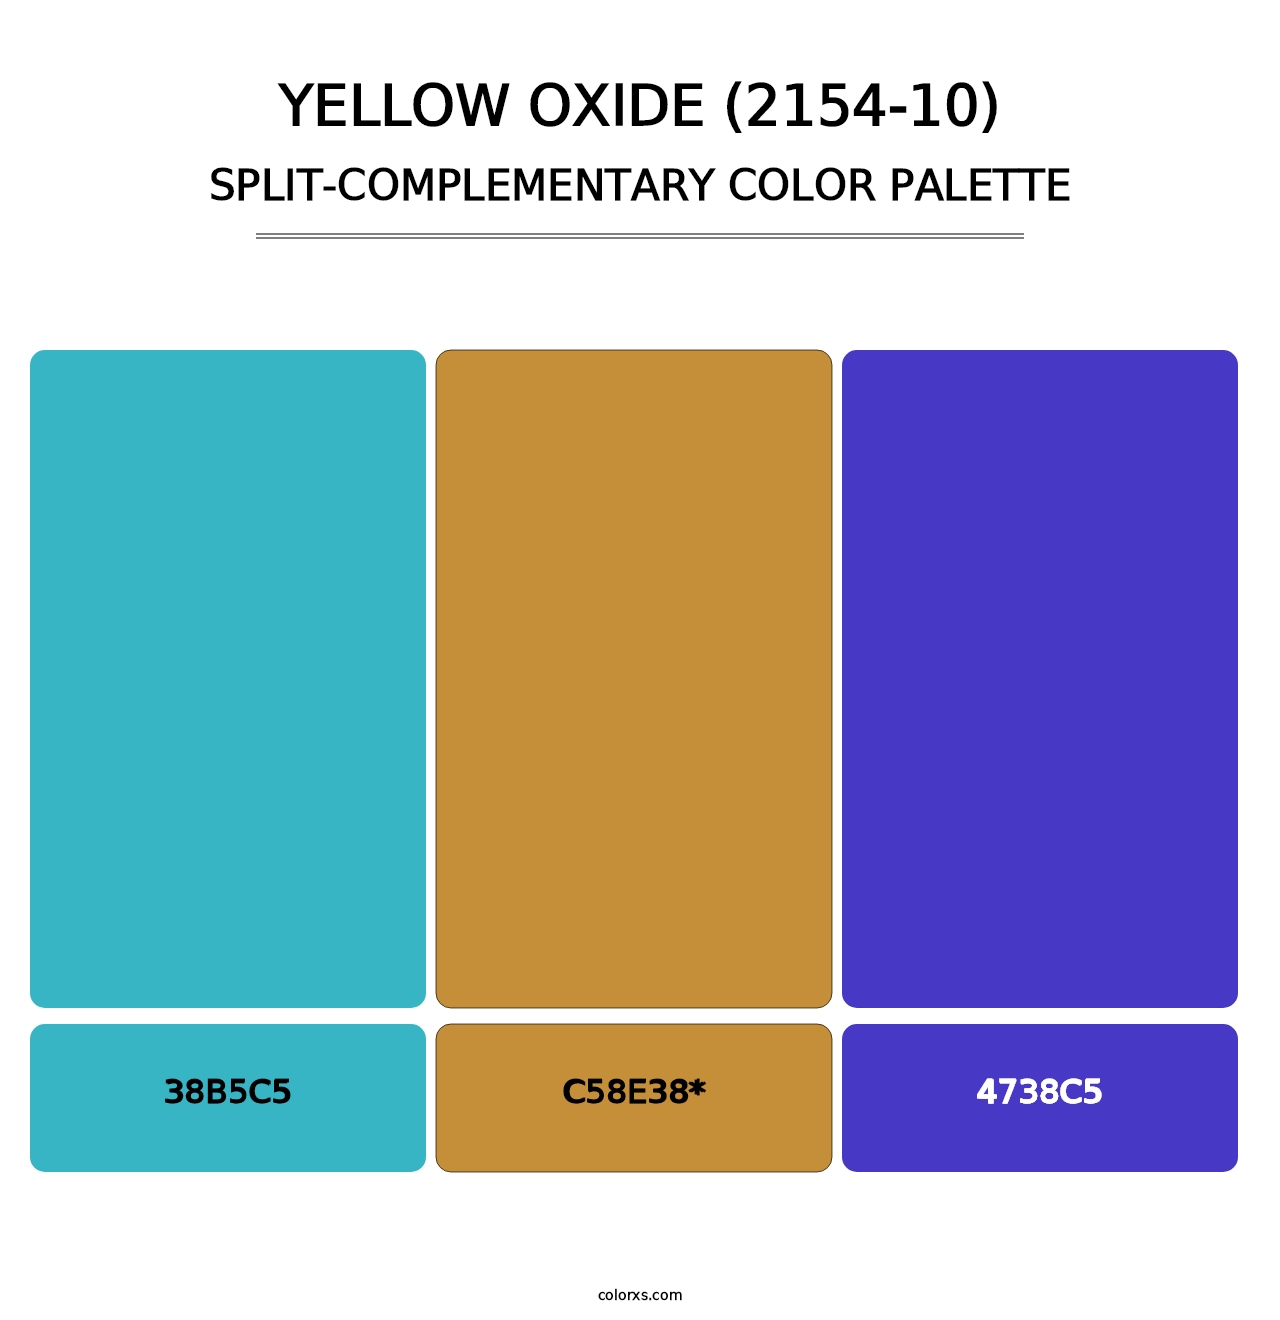 Yellow Oxide (2154-10) - Split-Complementary Color Palette